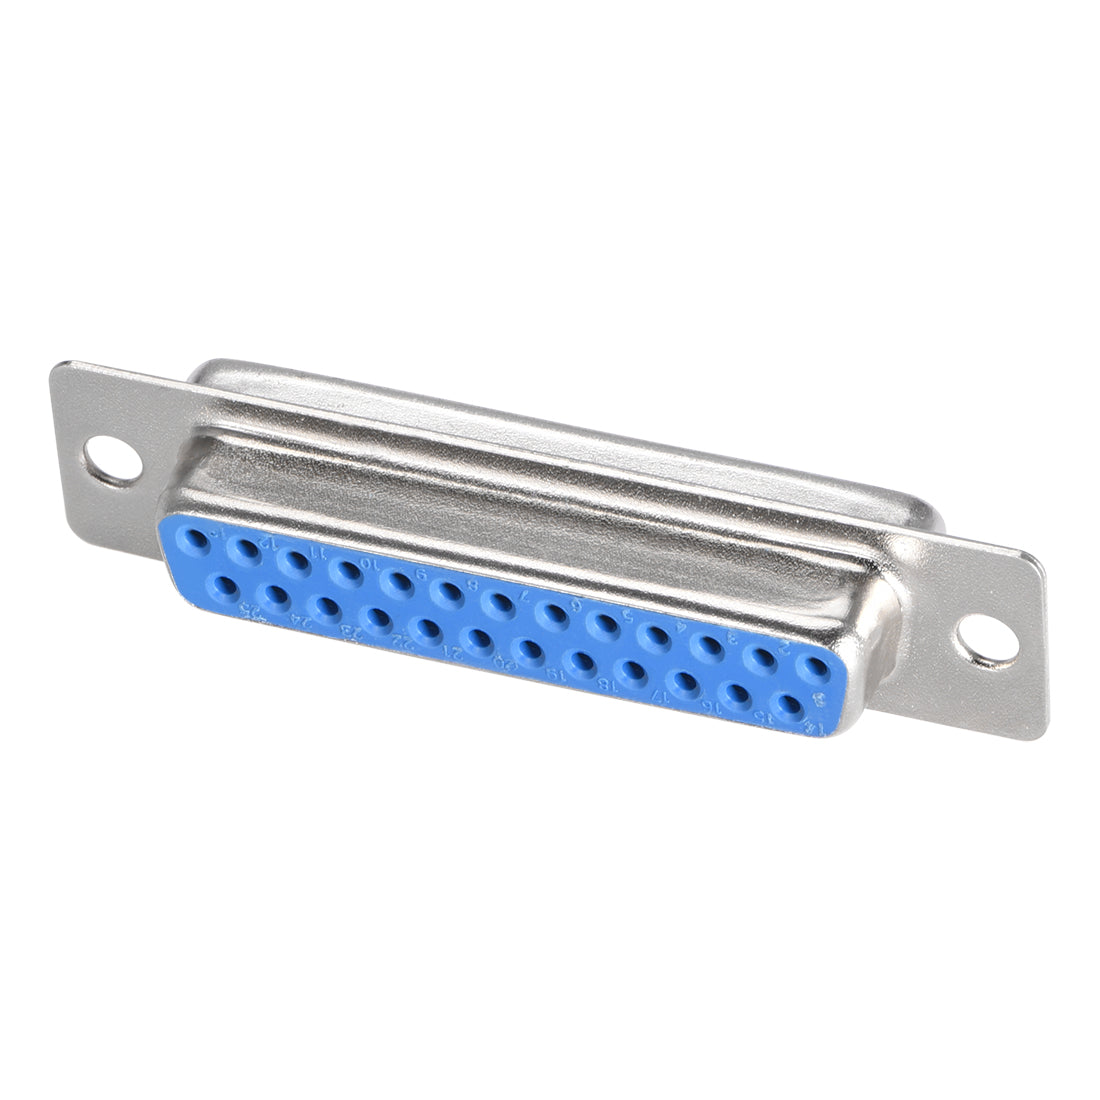 uxcell Uxcell D-sub Connector DB25 Female Socket 25-pin 2-row Port Terminal Breakout for Mechanical Equipment CNC Computers 20pcs